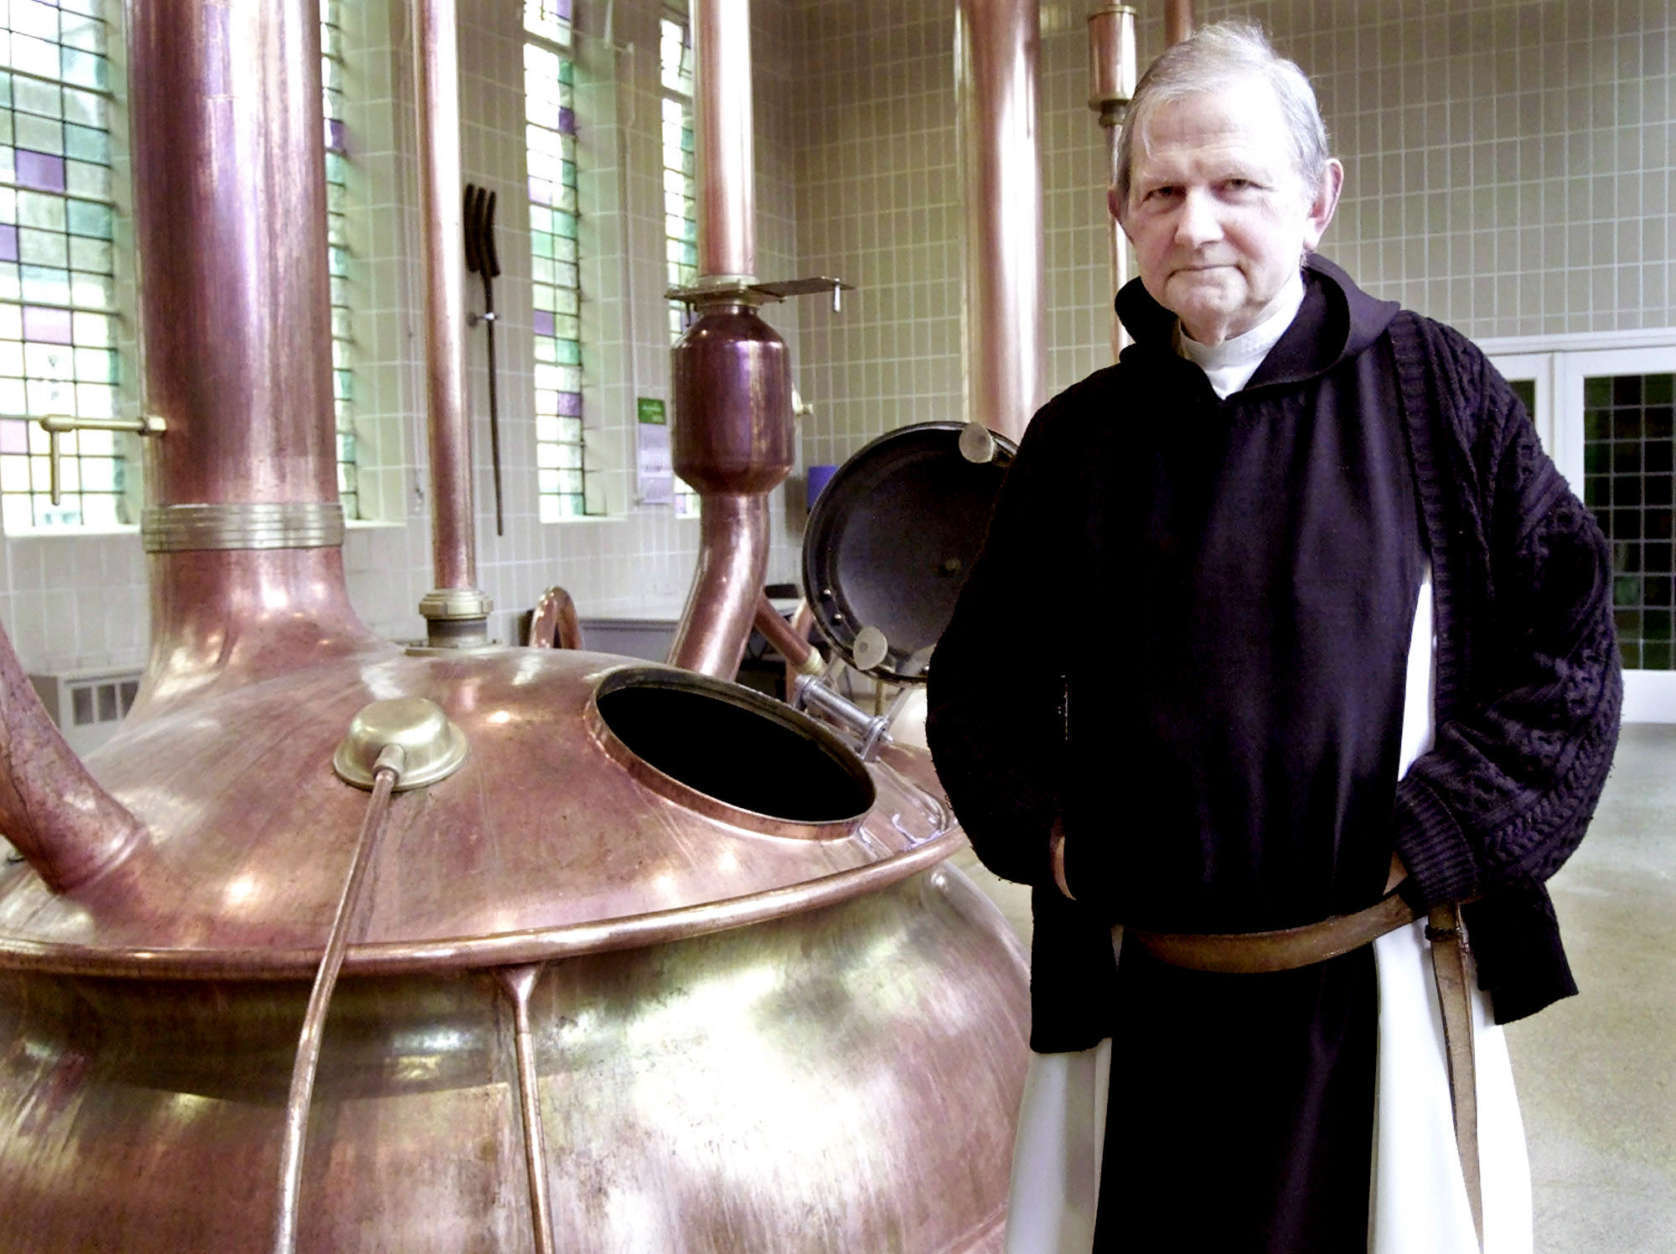 Father Abt of the Notre Dame de Saint Remy, poses at the brewery room in Rochefort, 60 miles south of Brussels, Jan. 24, 2002. The abbey is one of only a half a dozen monasteries where the monks still follow the centuries old Trappist tradition of beer making and its strong, dusky brews are hailed by connoisseurs as some of the world's best. (AP Photo/Yves Logghe)